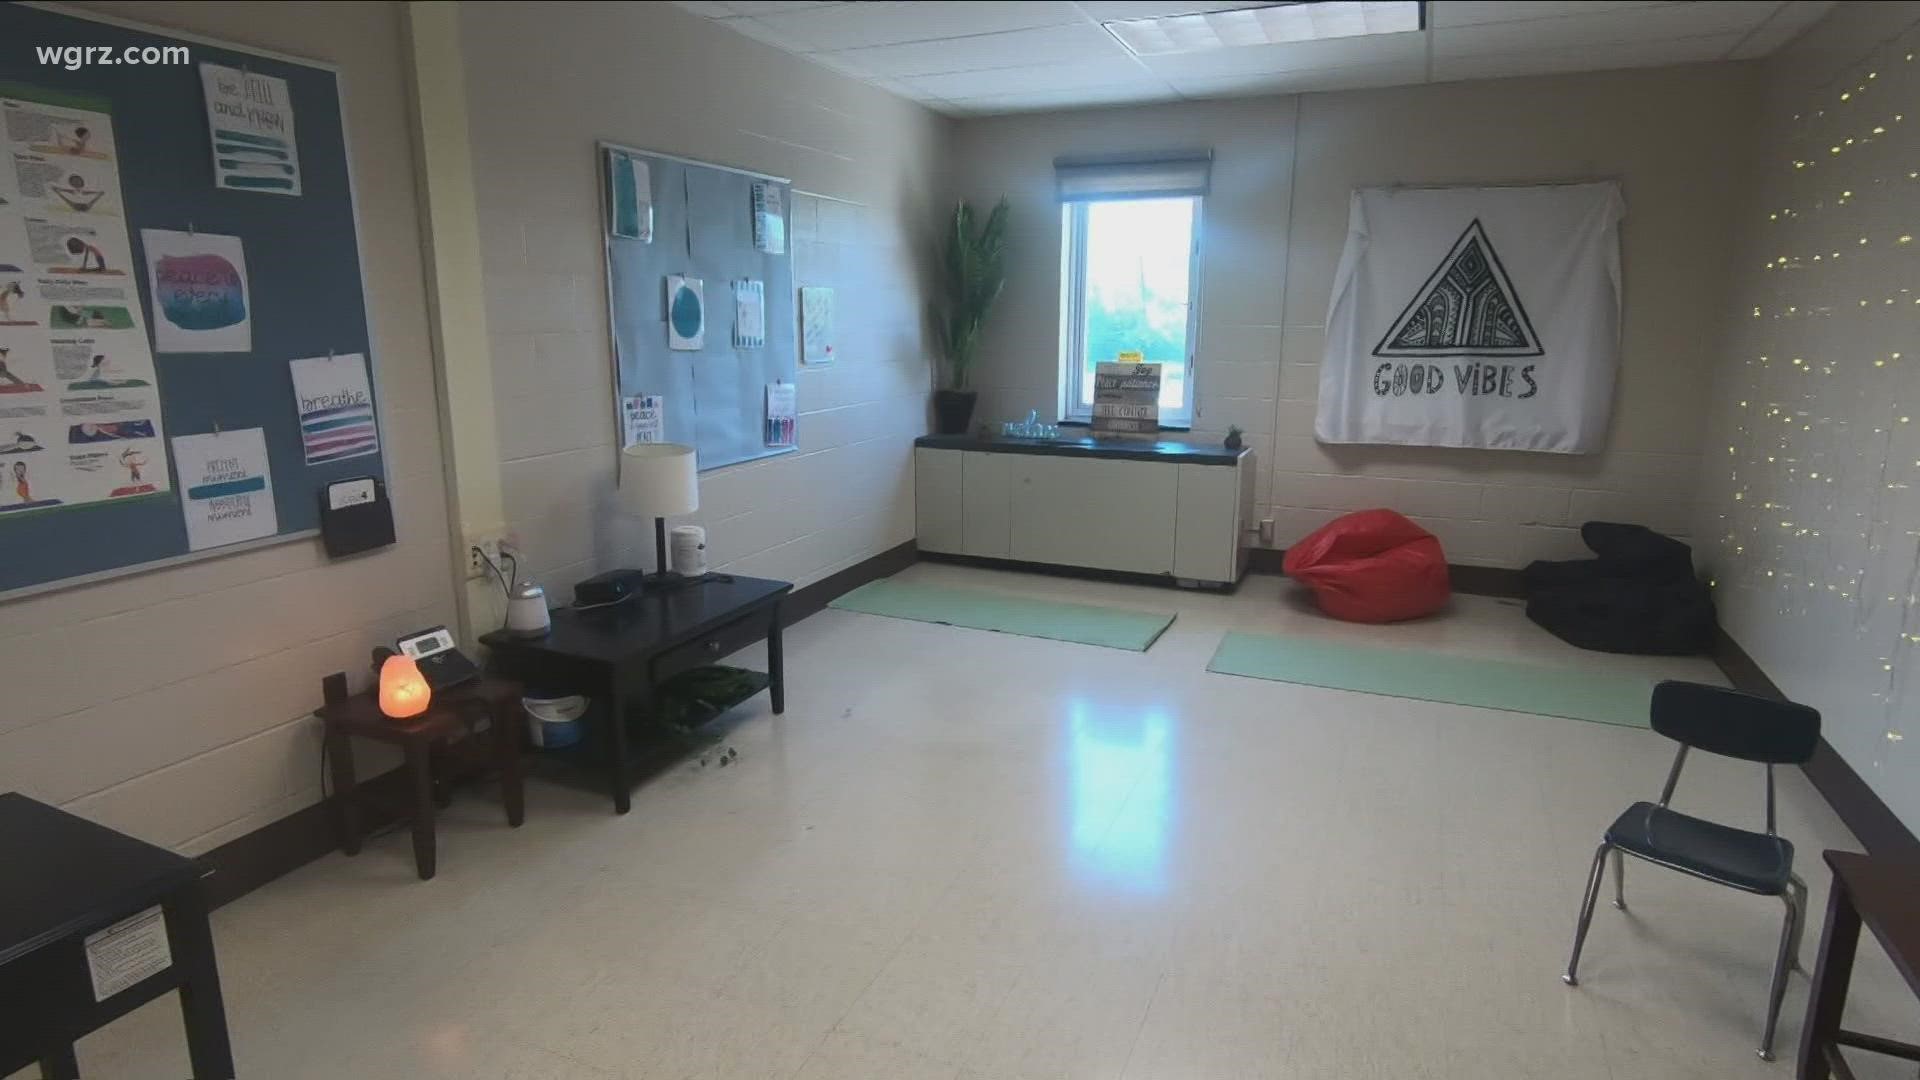 Daybreak's Alexandra Rios takes us to West Hertel Academy in Buffalo to check out their mindfulness room and see how it helps their mental health.